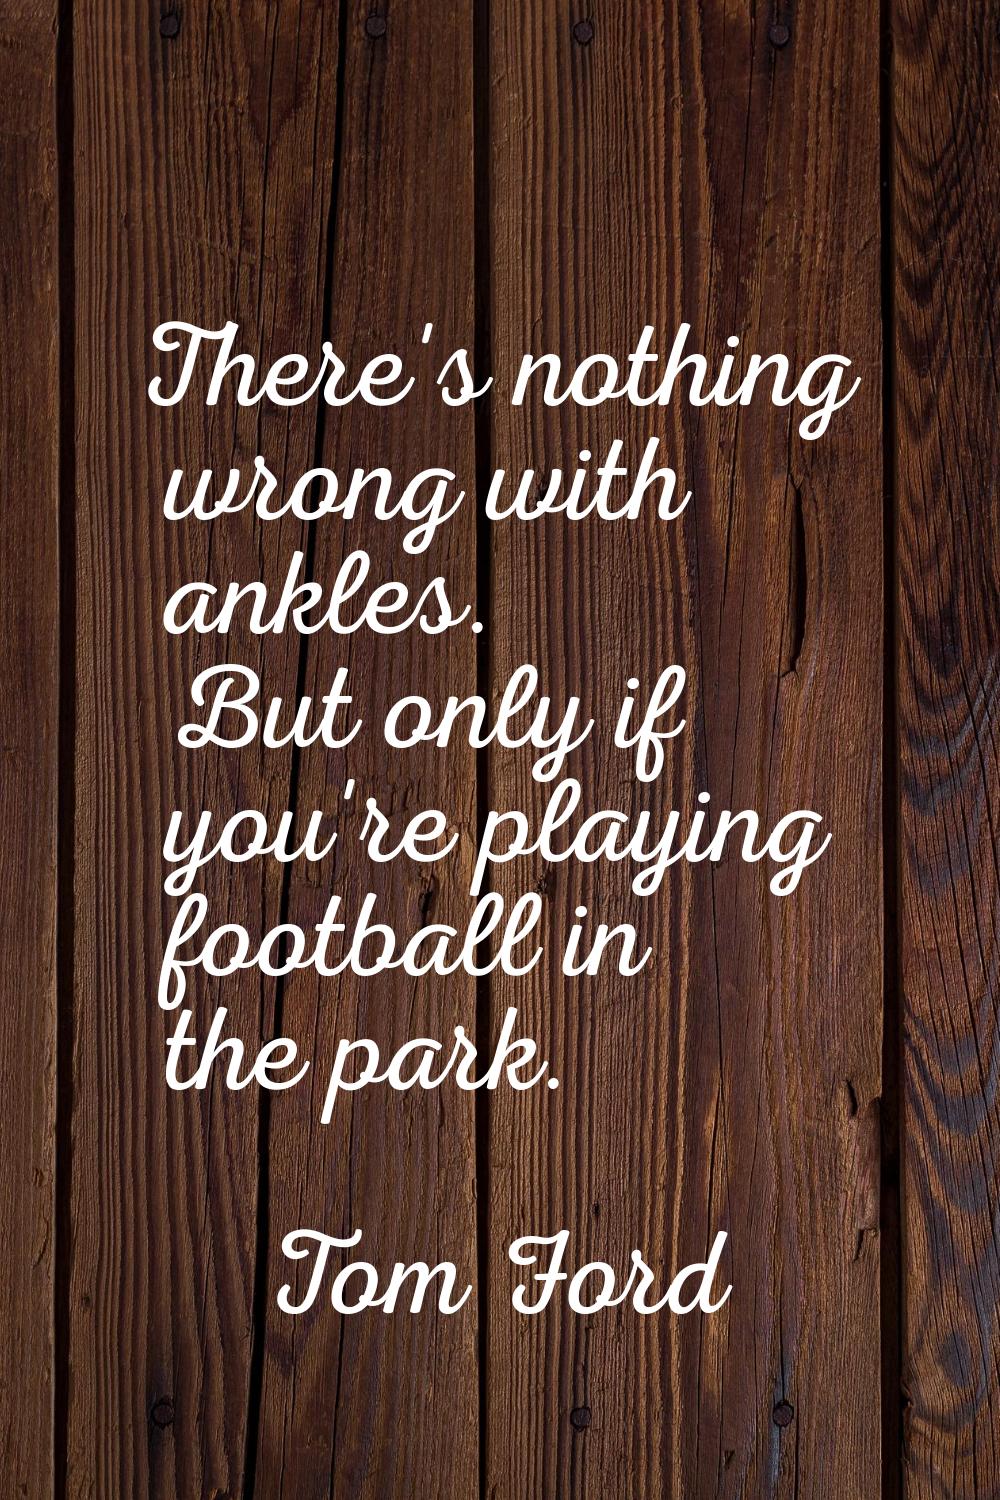 There's nothing wrong with ankles. But only if you're playing football in the park.